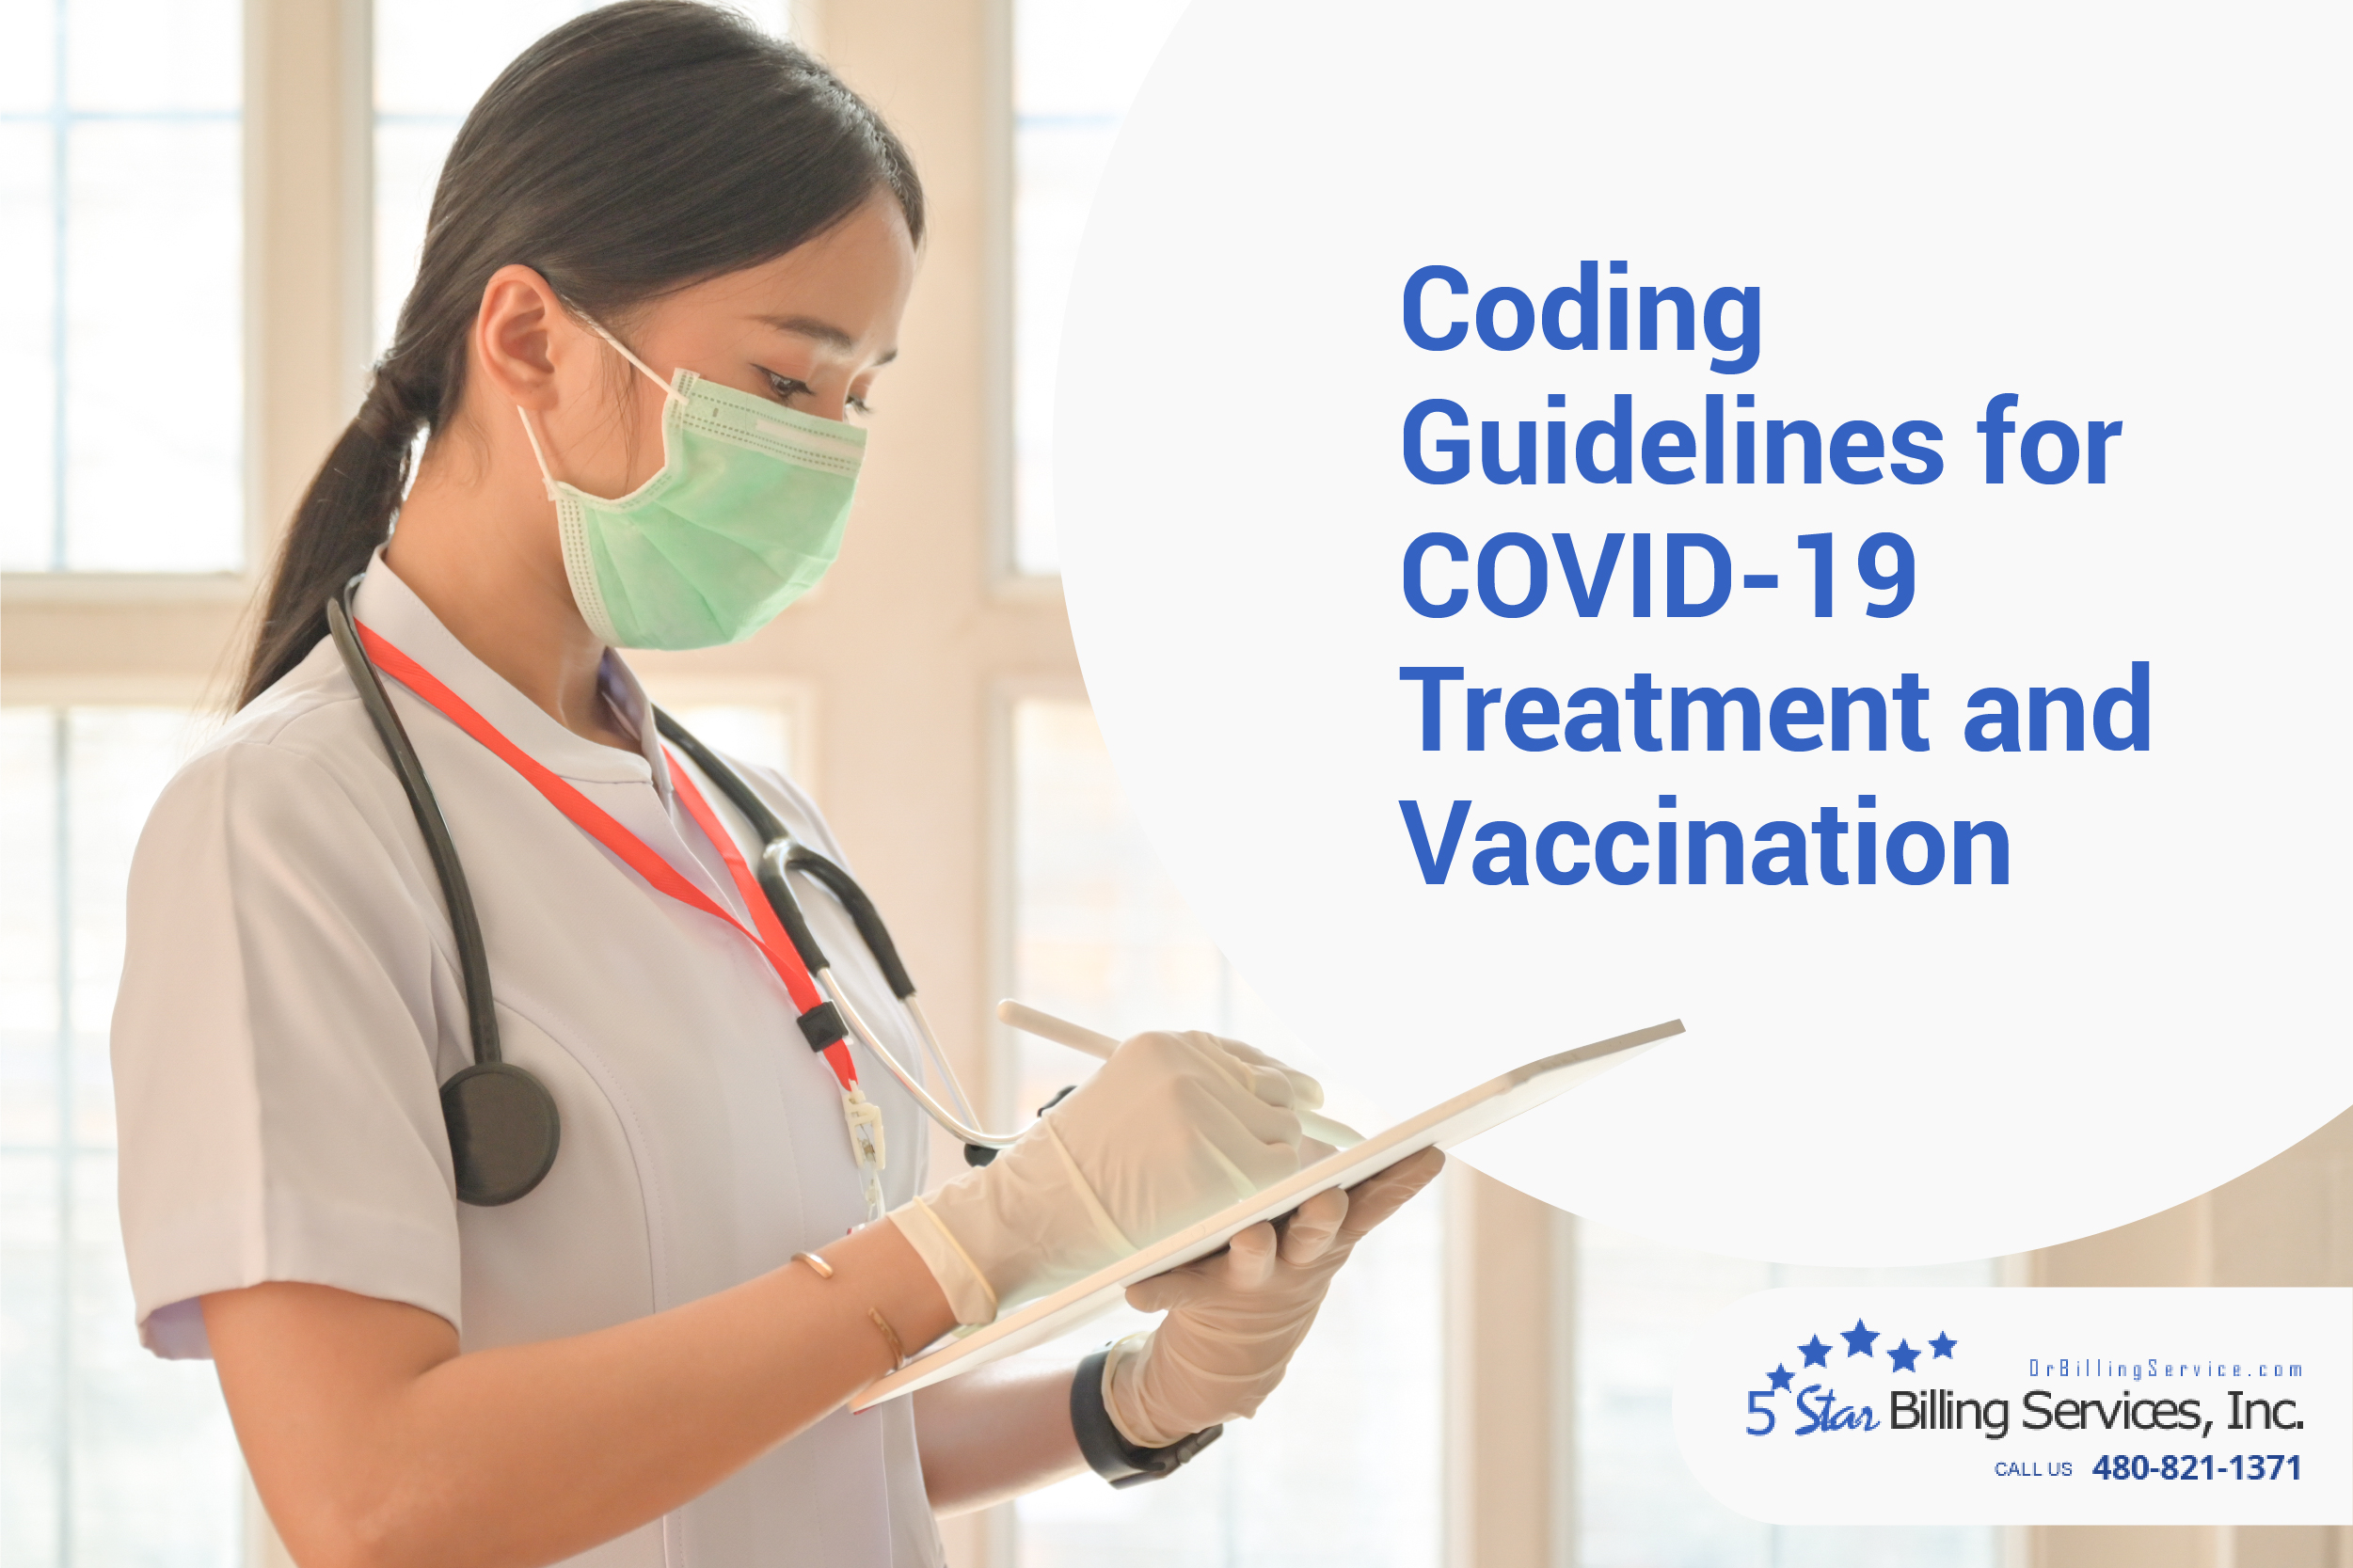 icd10 code for covid19